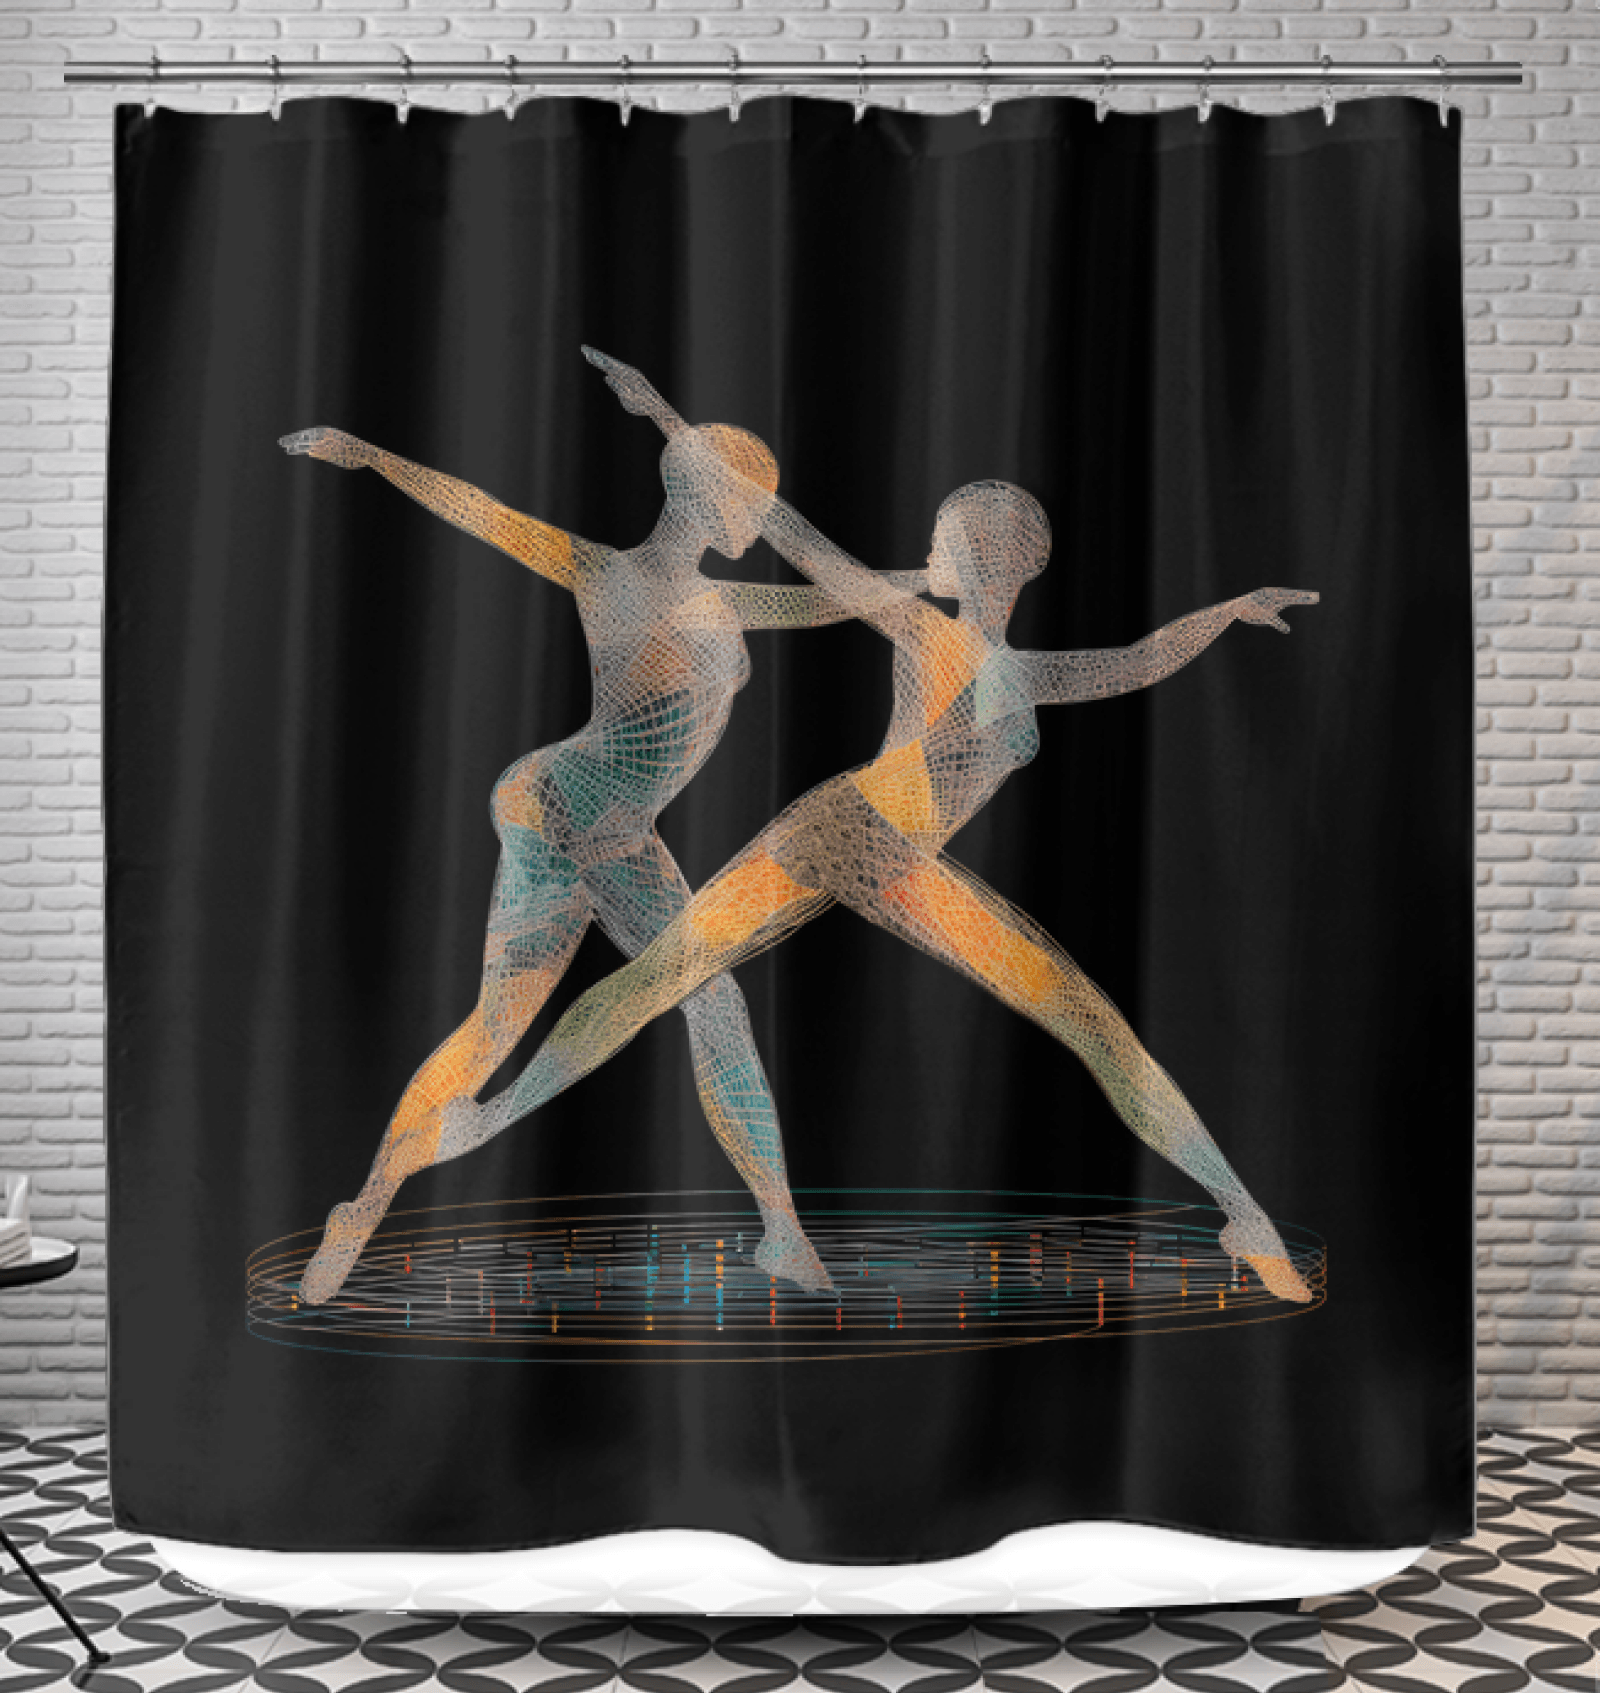 Artistic shower curtain featuring the enchanting dance of women in elegant motion.